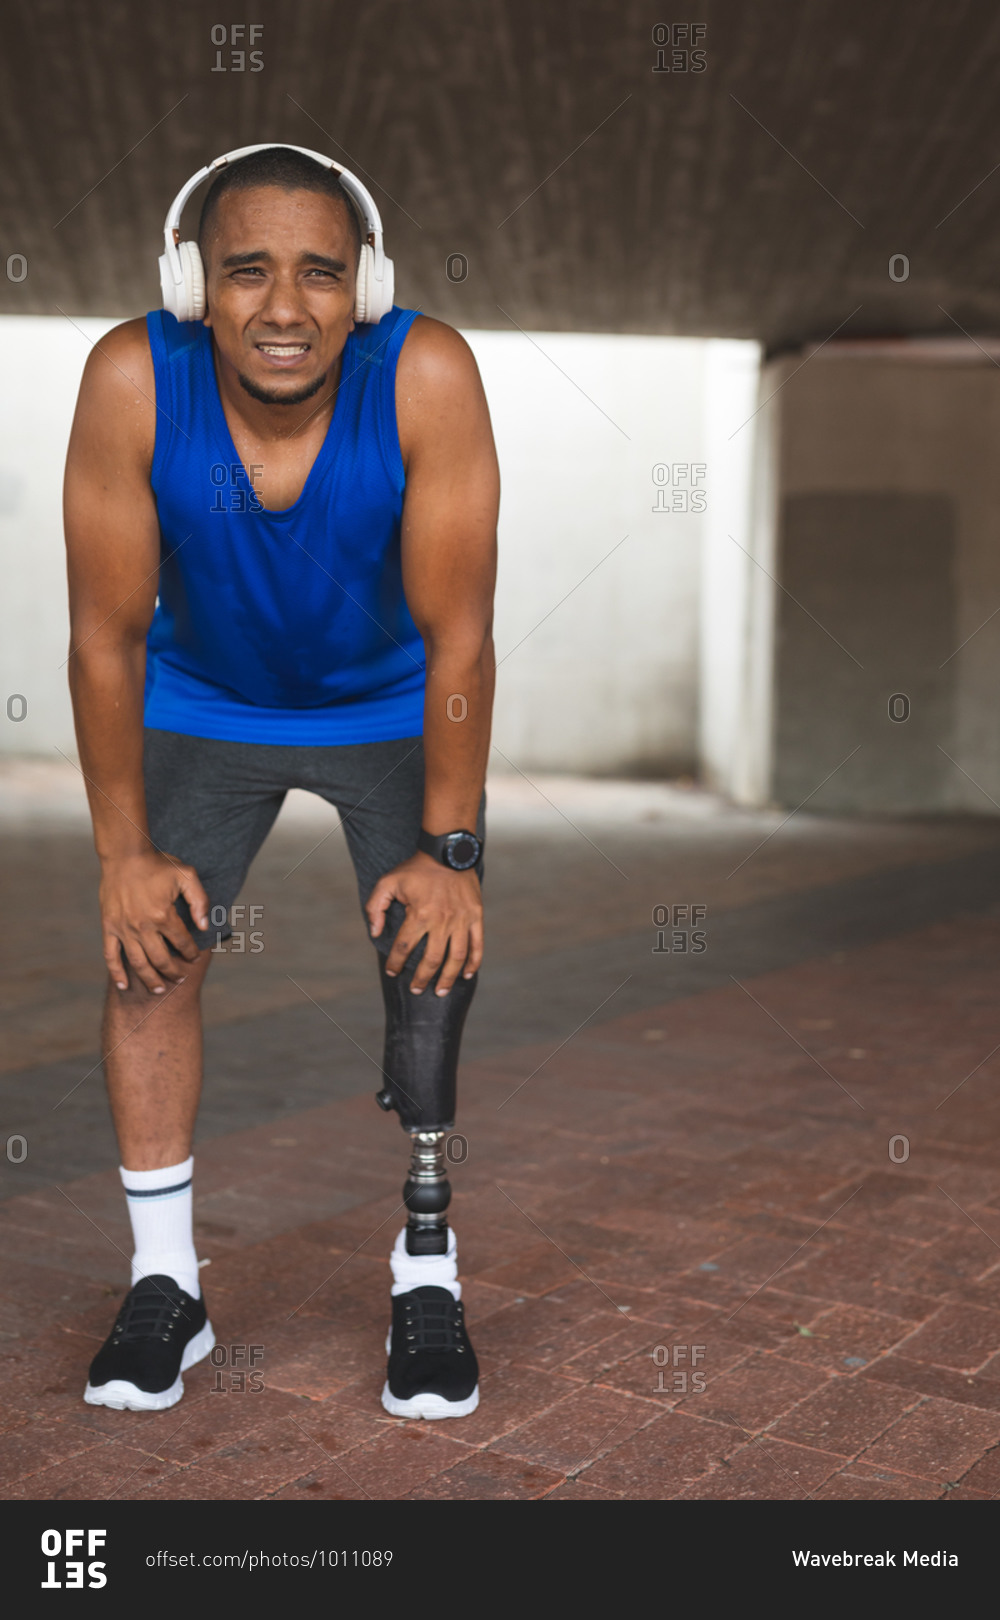 Disabled mixed race man with a prosthetic leg, working out in an urban park, wearing wireless headphones taking a break. Fitness disability healthy lifestyle.